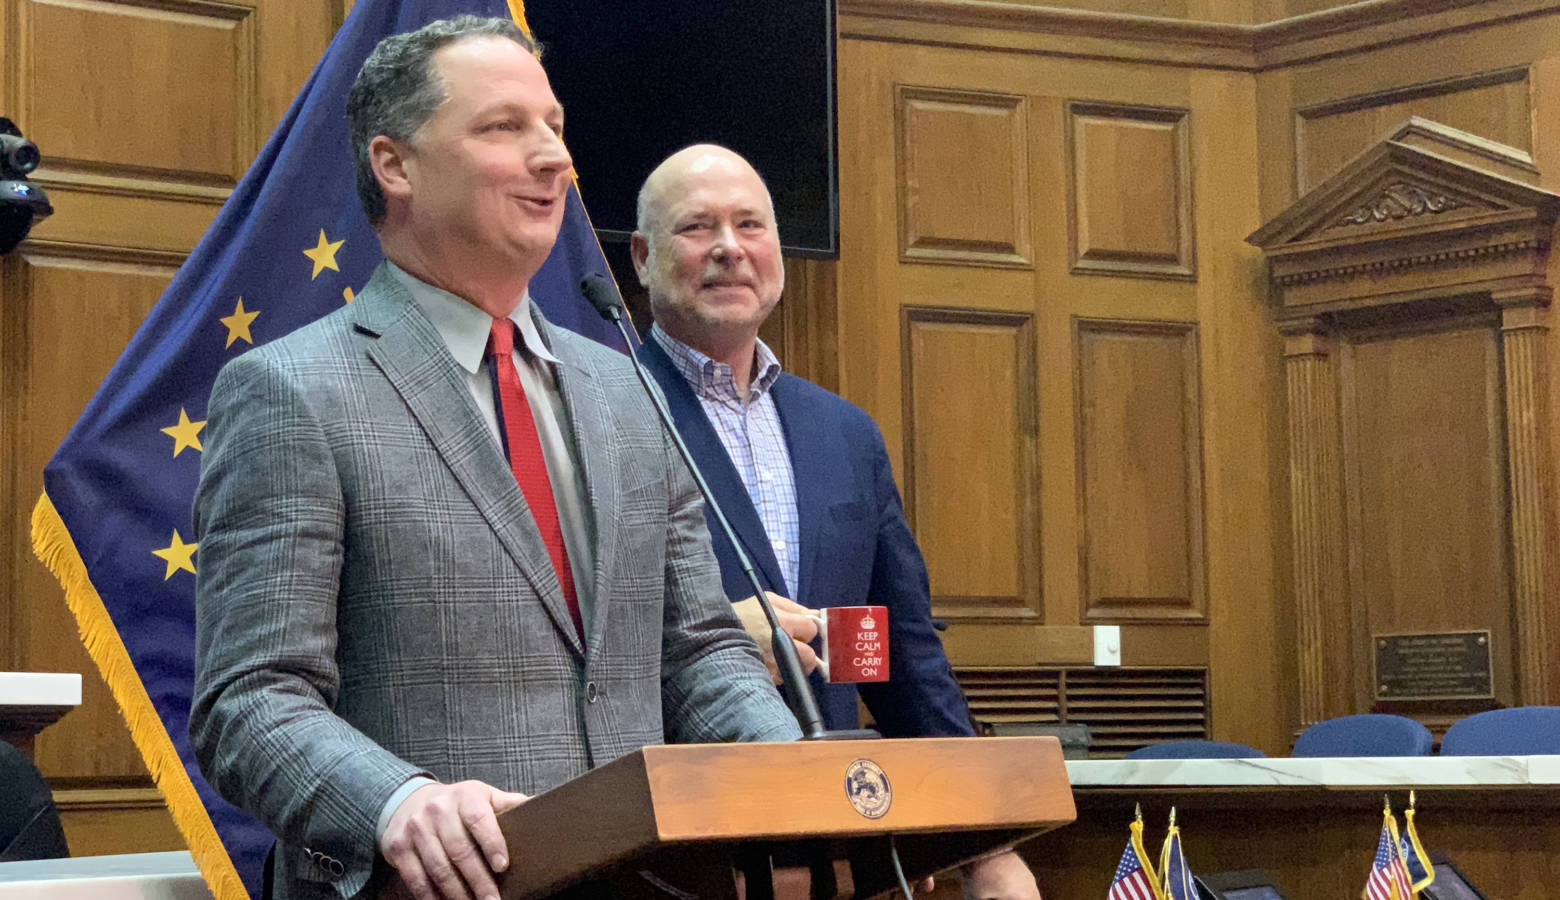 Rep. Todd Huston (R-Fishers), left, and House Speaker Brian Bosma (R-Indianapolis) discuss Huston's ascension to the speakership. (Brandon Smith/IPB News)